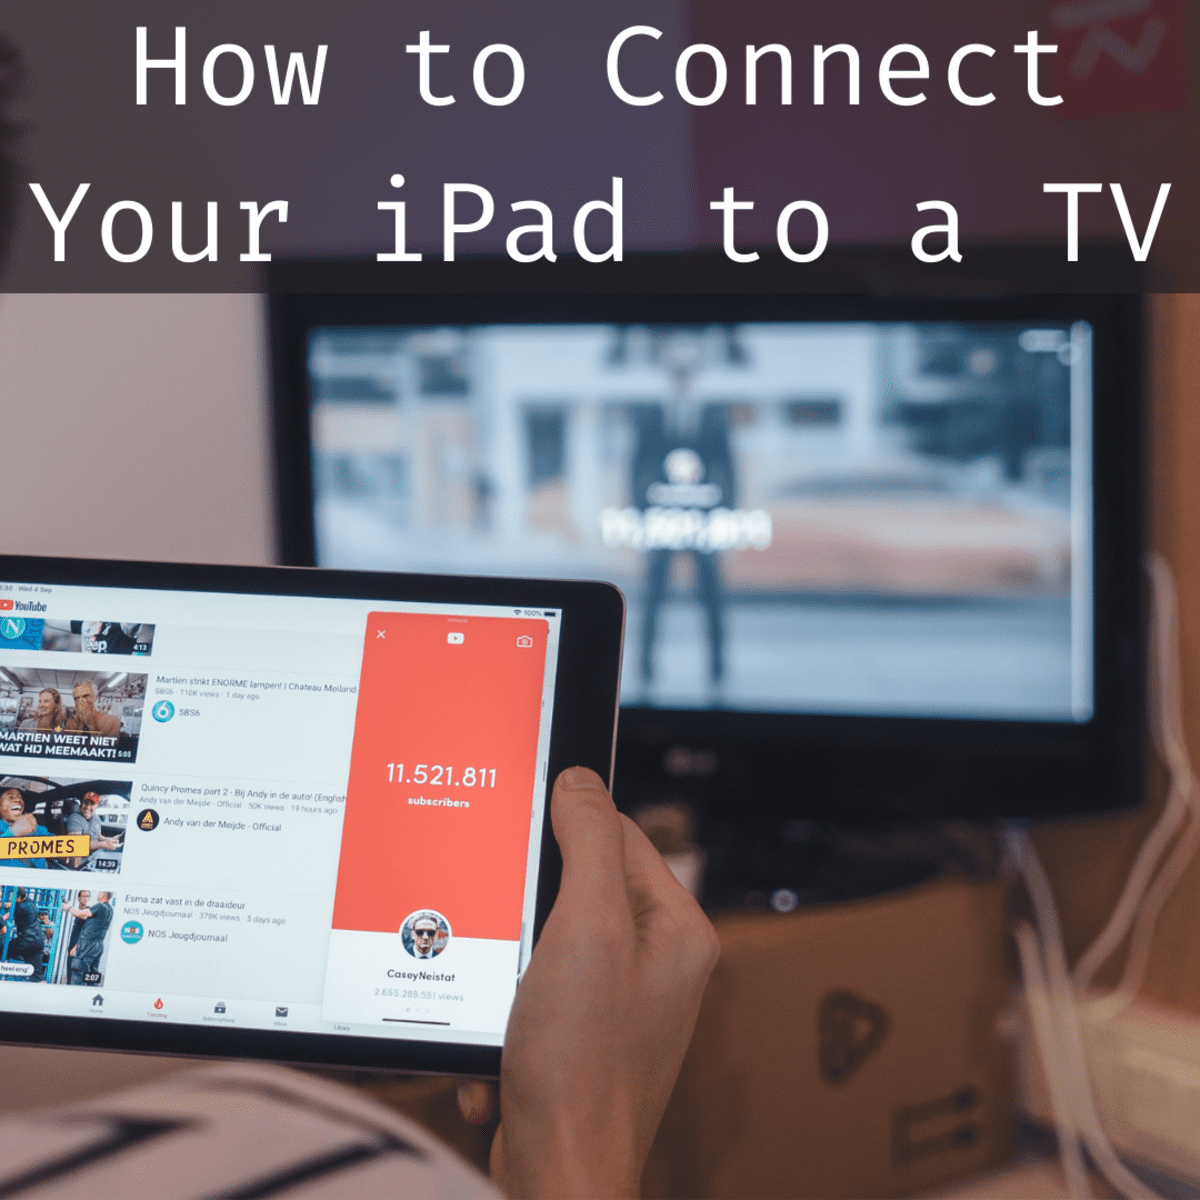 How To Connect An Ipad Tv With Hdmi, Can I Mirror From Ipad To Tv